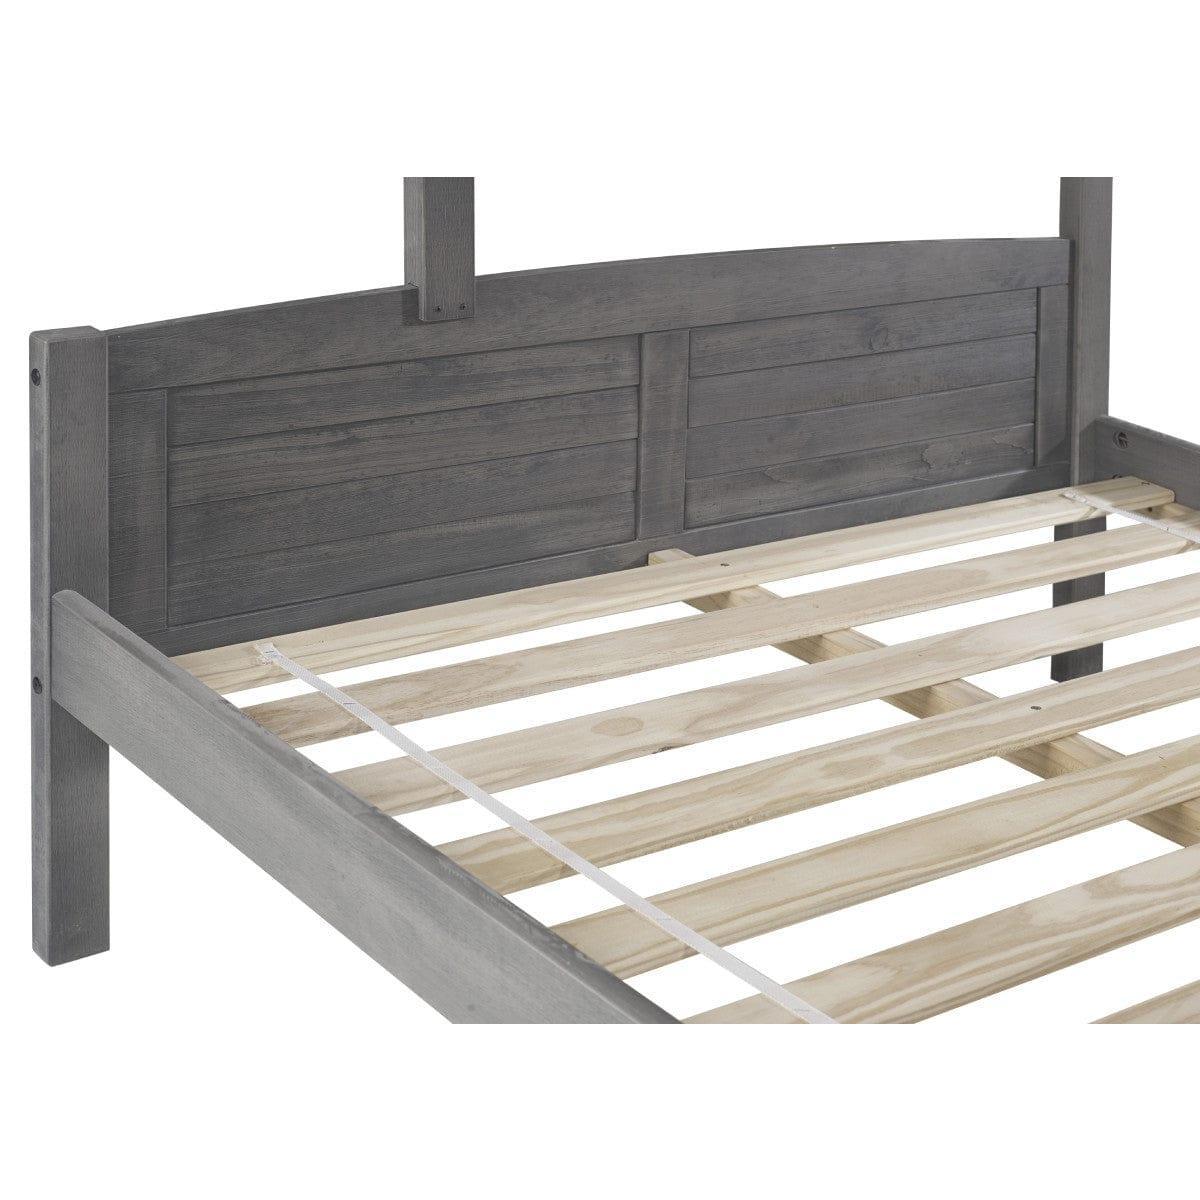 Donco Twin/Full Louver Bunk Bed With Twin Trundle Bed In Antique Grey Finish 2012-TFAG_503-AG - Bedroom Depot USA